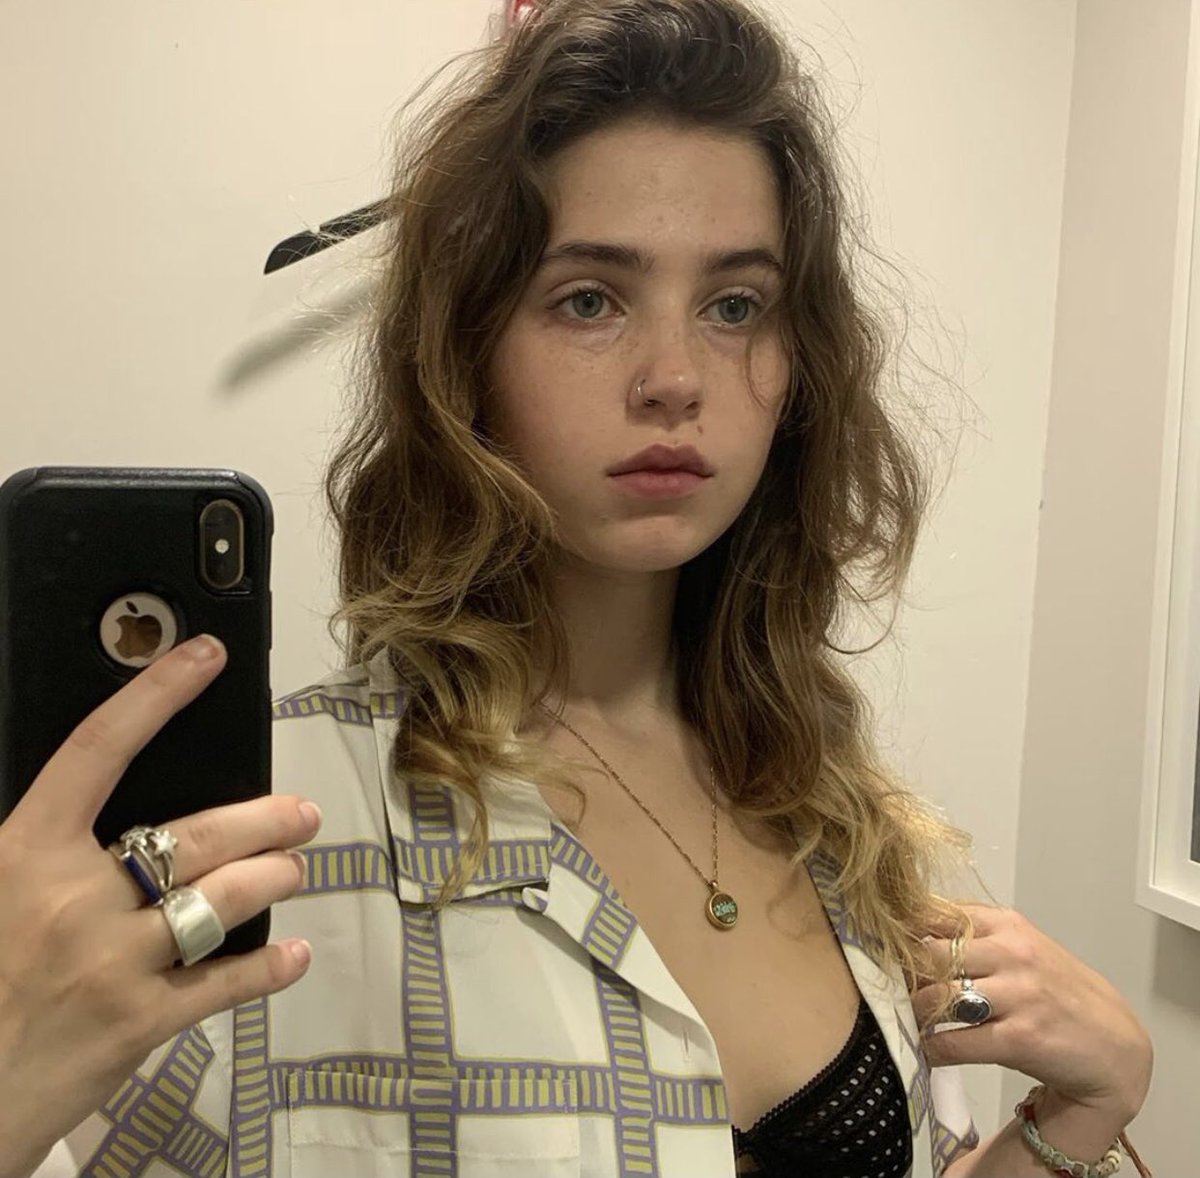 Listen to Clairo cover The Strokes' 'I'll Try Anything Once